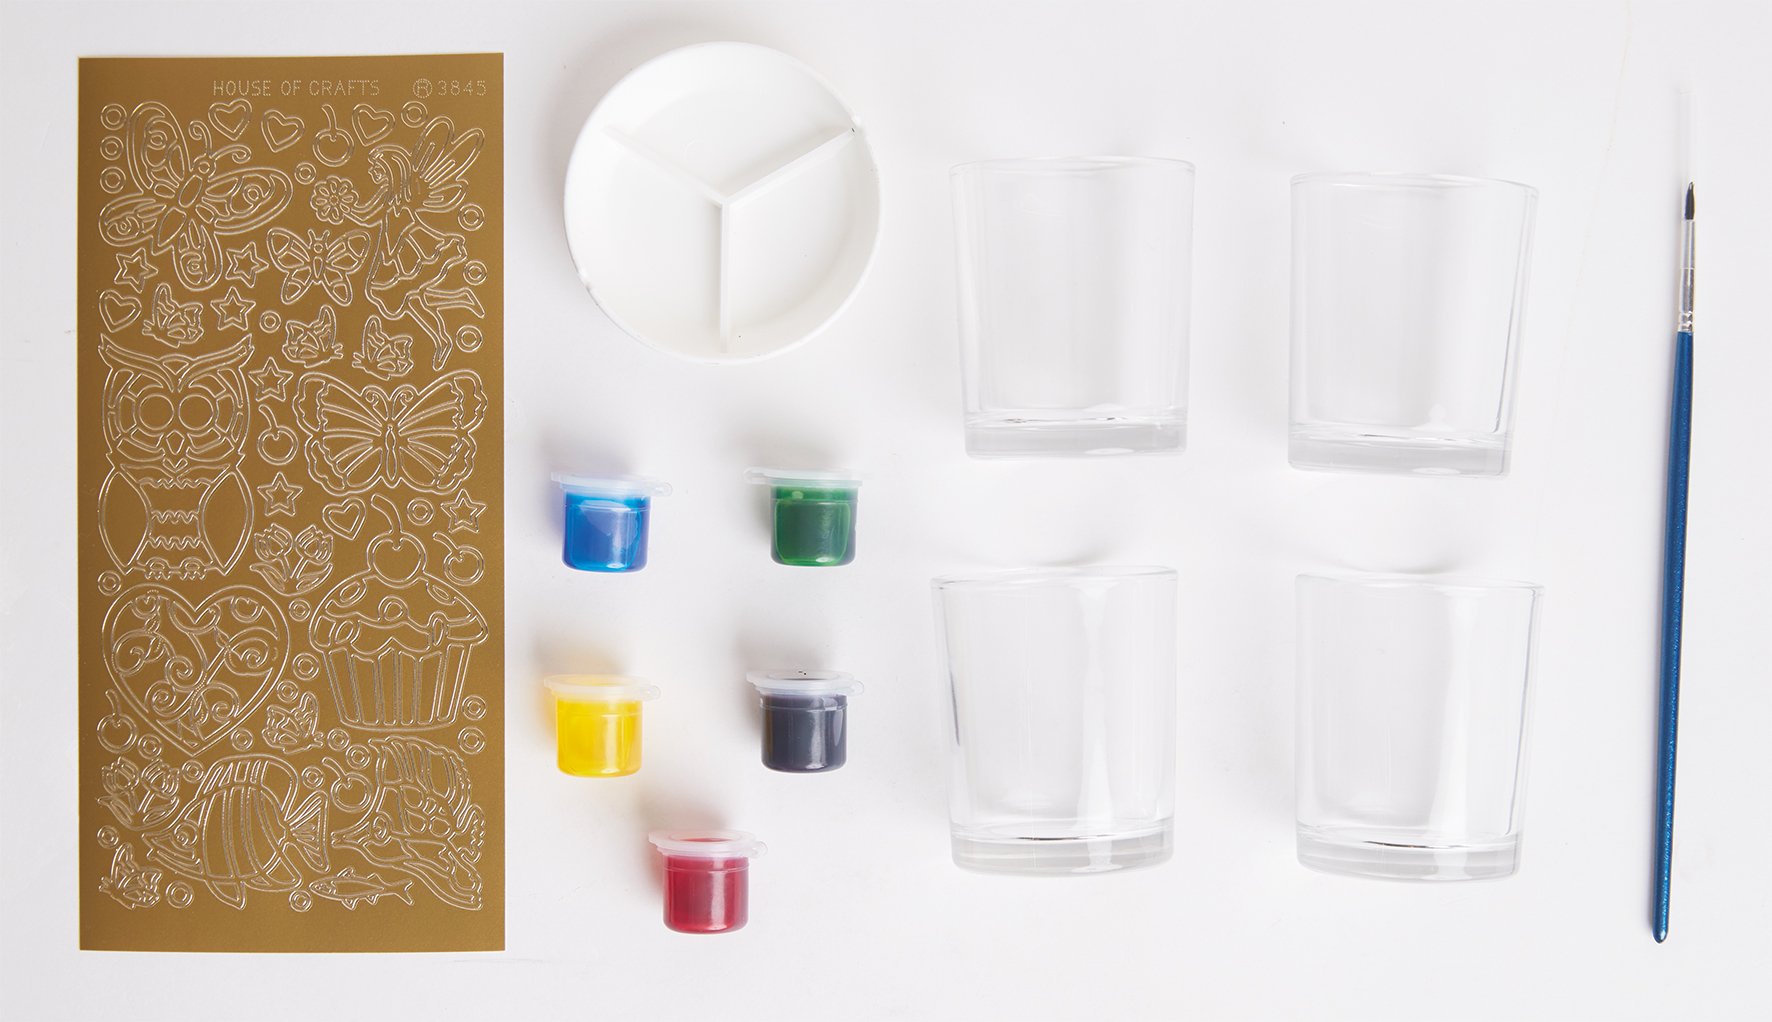 House of Crafts Creative Glass Painting Kit